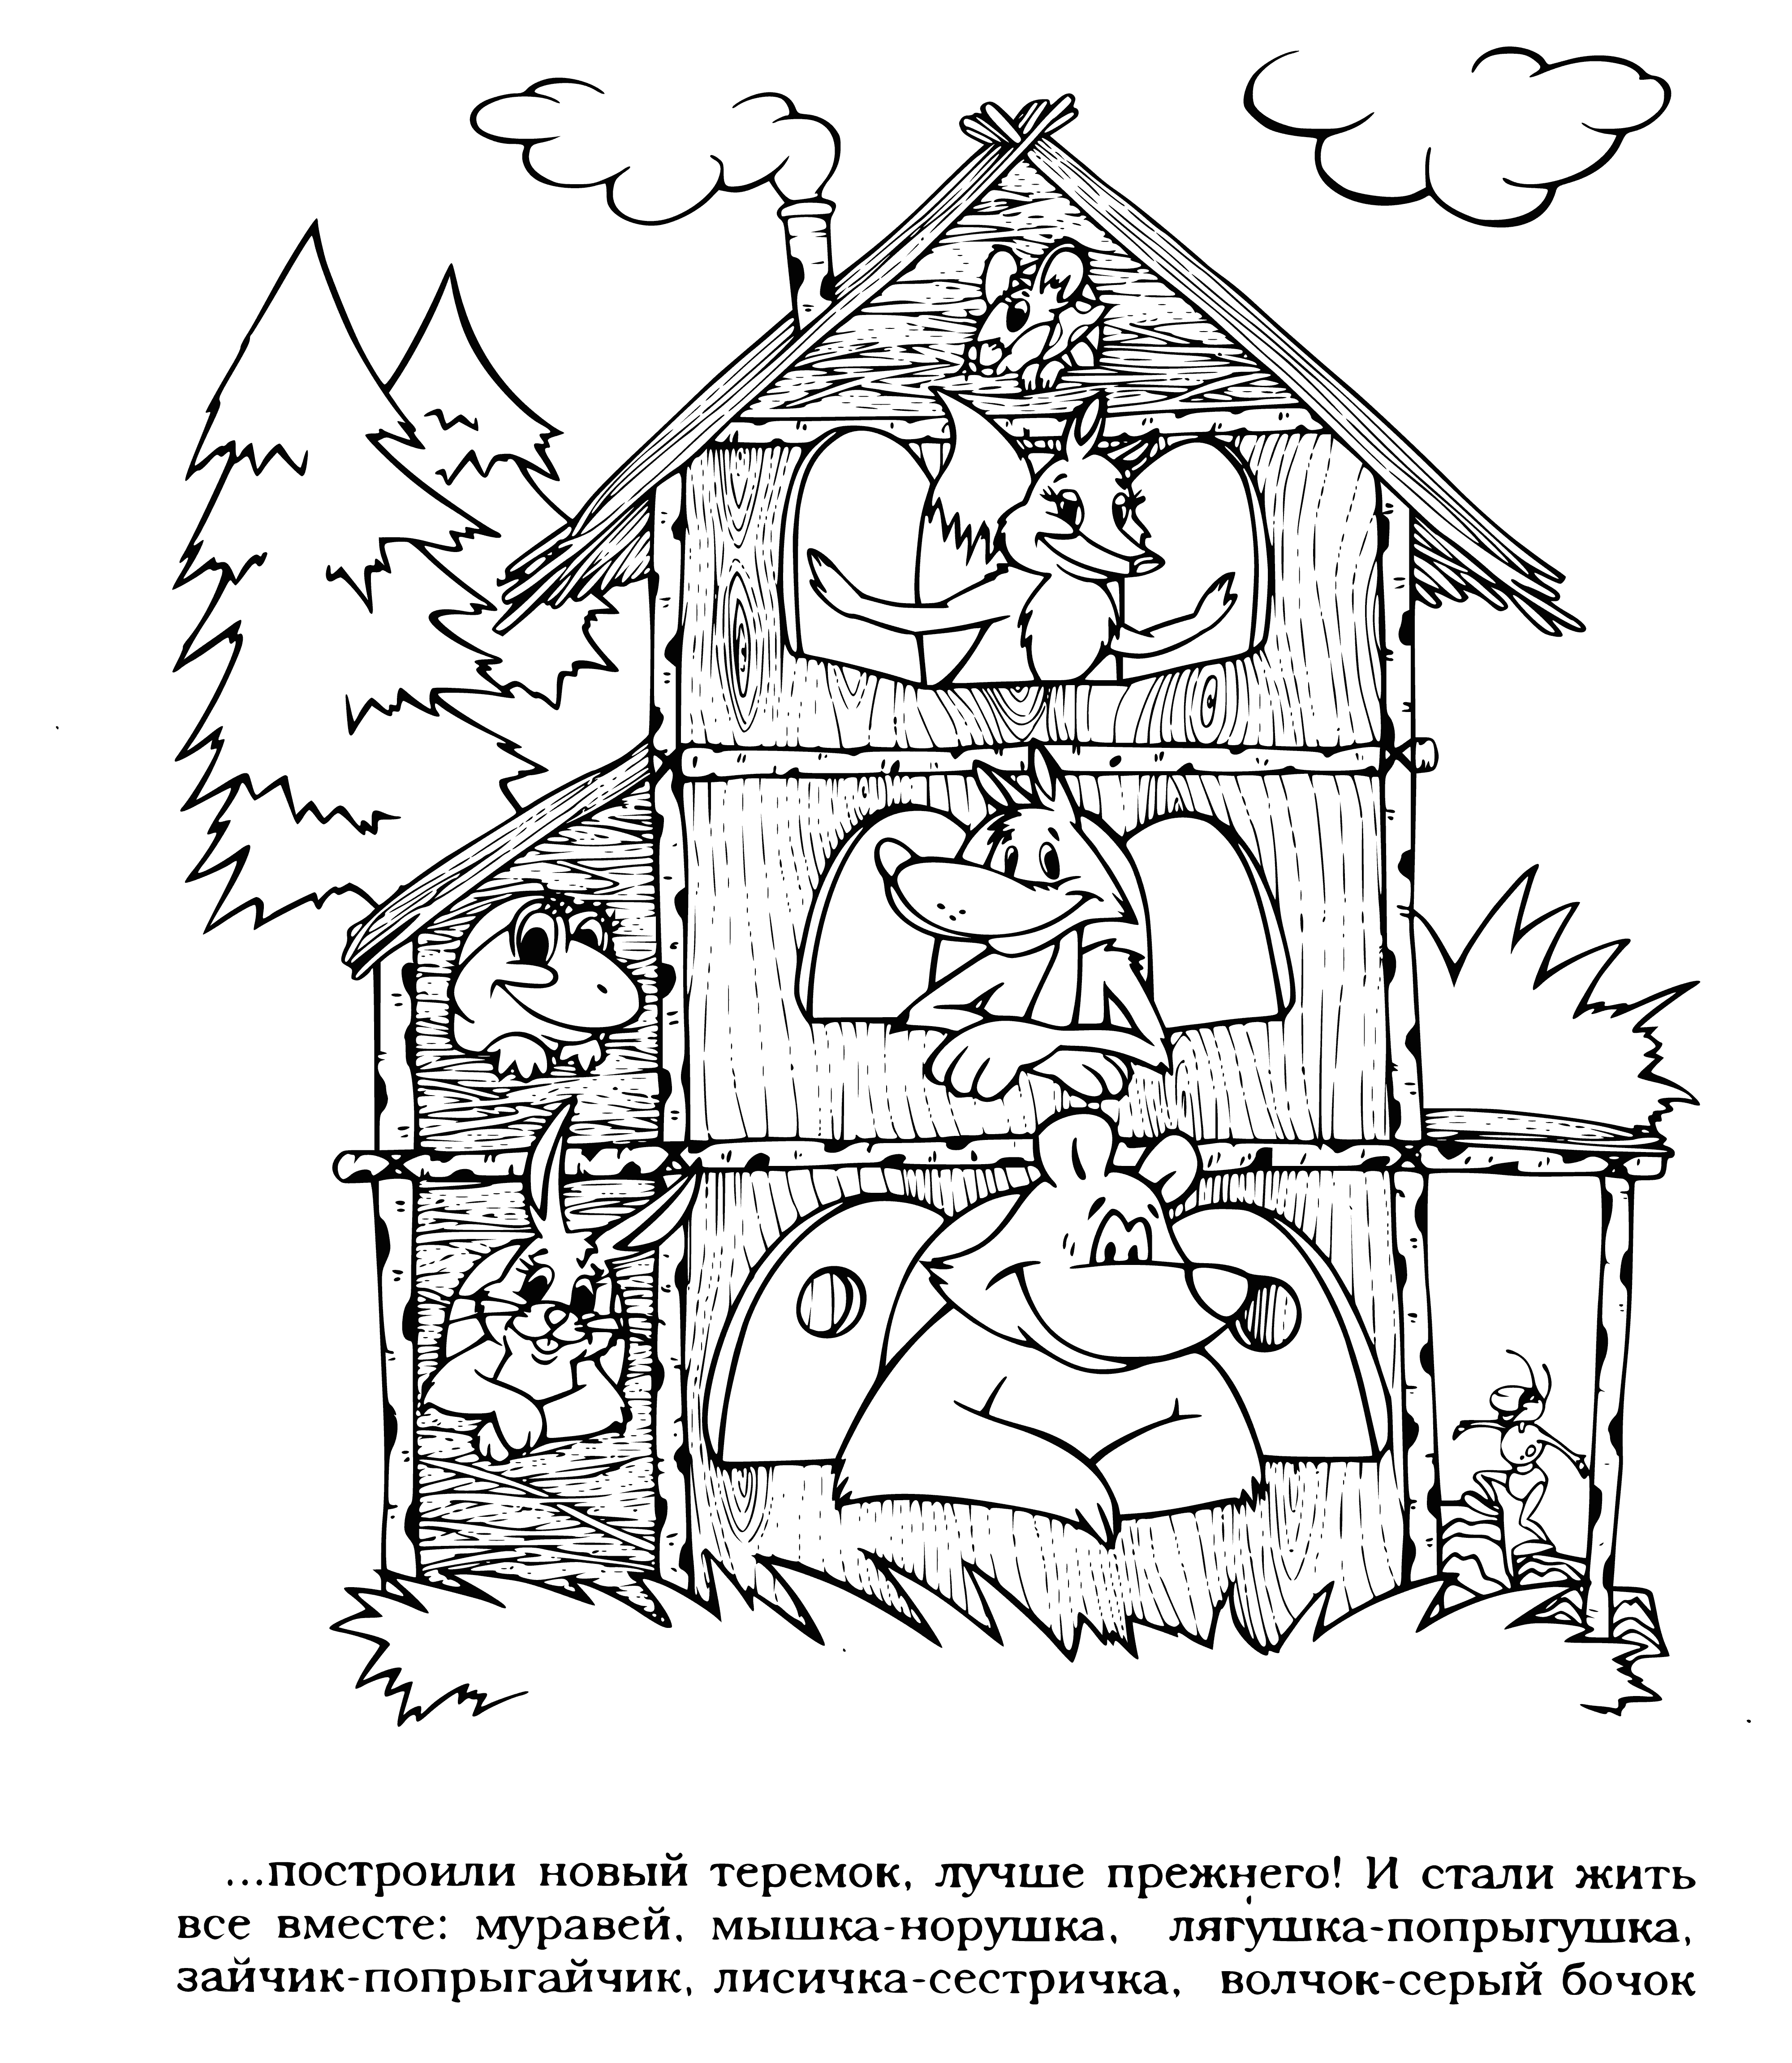 coloring page: A teremok with chicken legs standing in a meadow with a river, a black cat in a golden boat with a girl and boy holding hands.